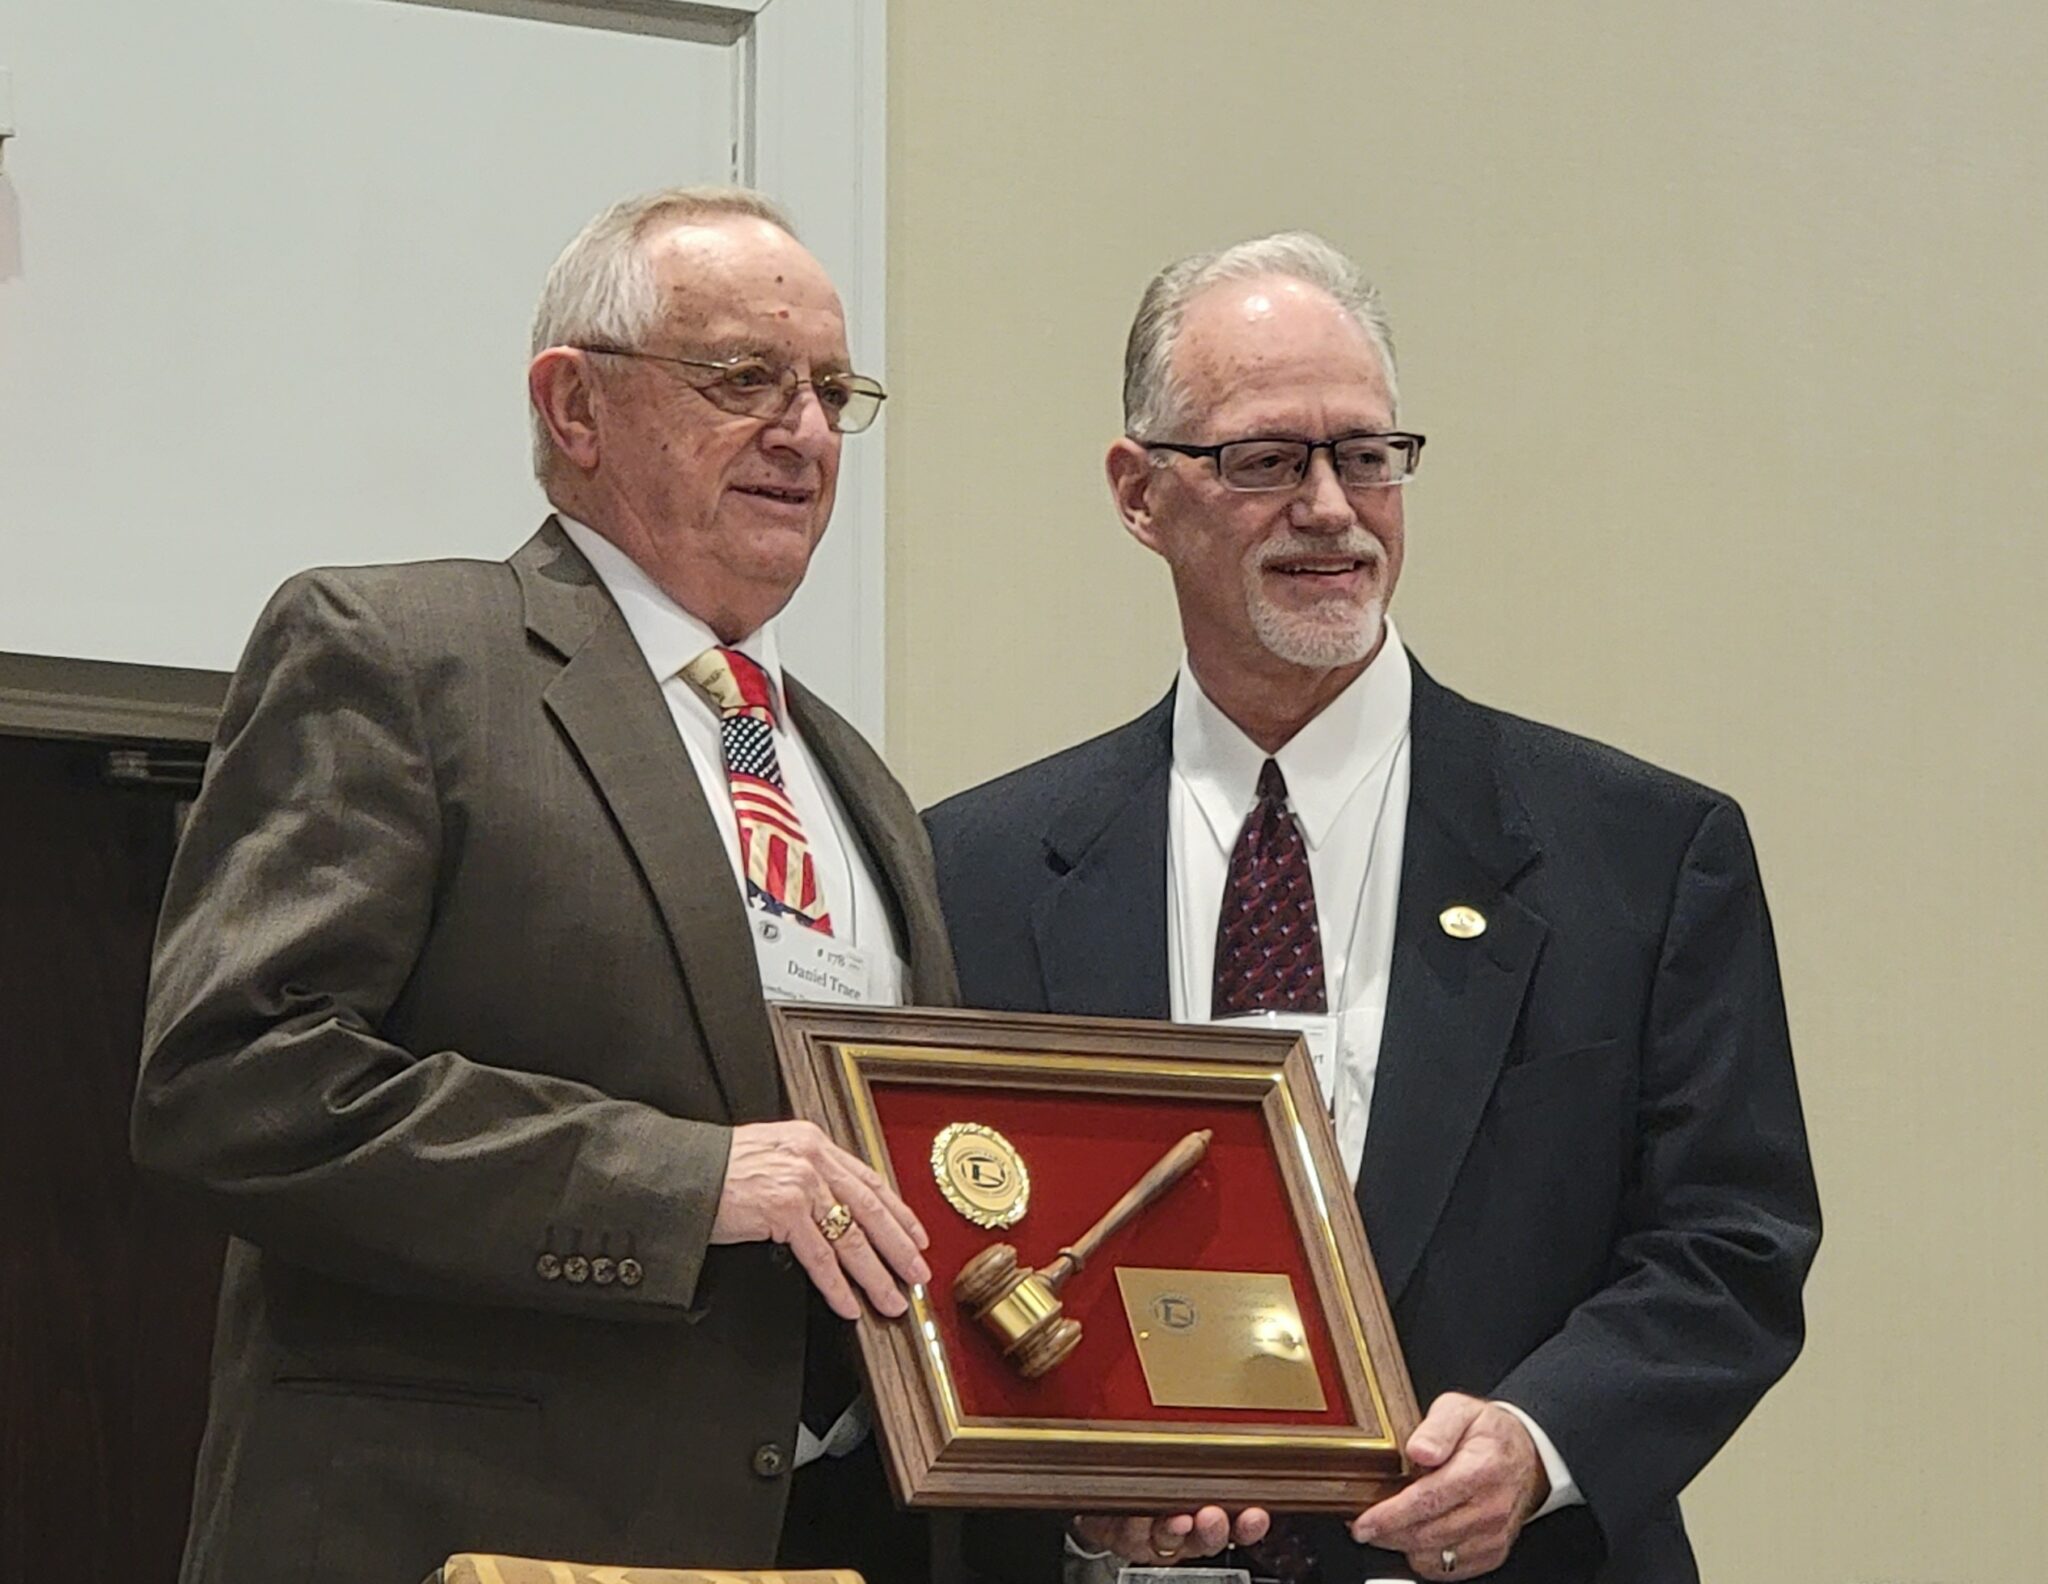 Left to Right: Daniel Trace being presented a plaque by Michael Calvert